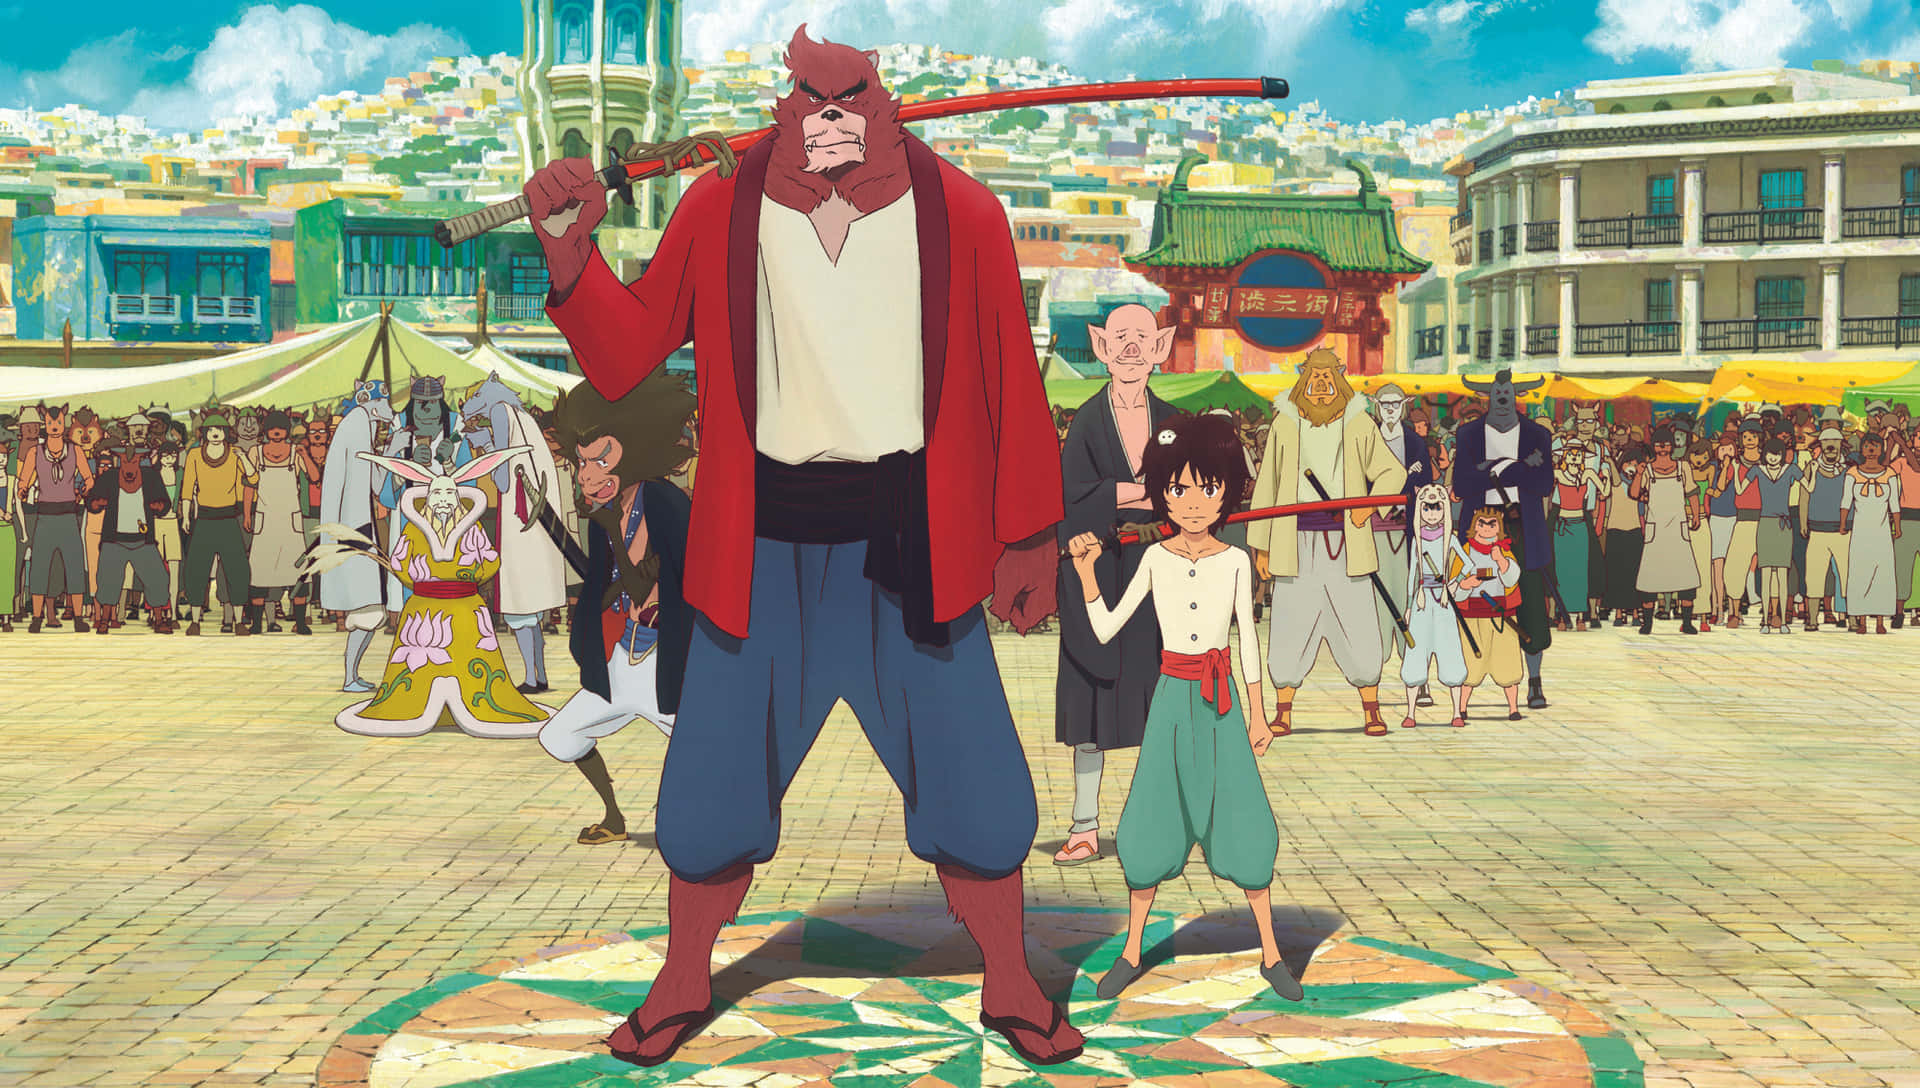 Ren reunites with Kumatetsu in The Boy and the Beast Wallpaper